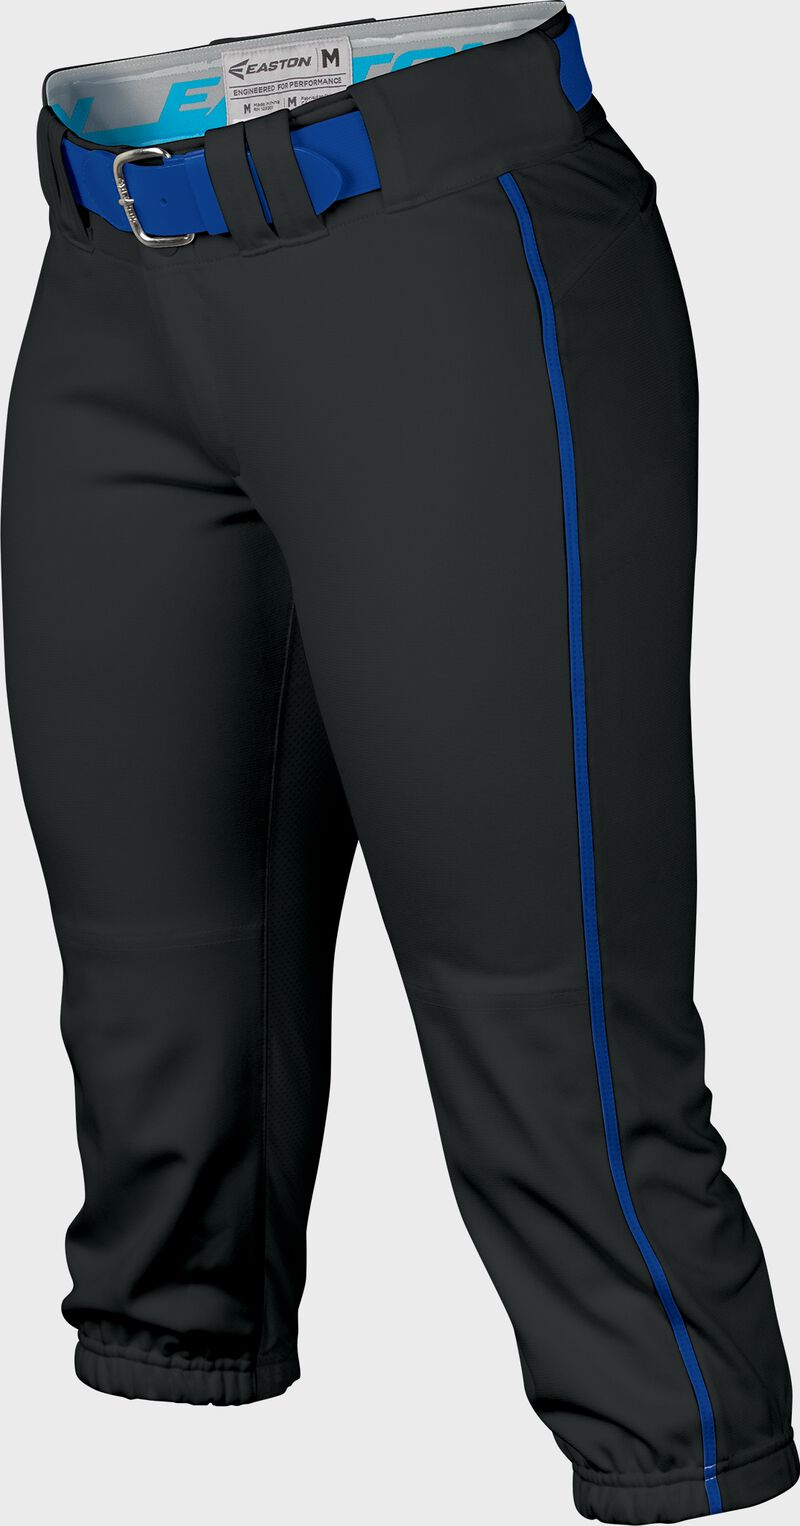 Easton Prowess Softball Pant Women's Piped BLACK/ROYAL  M